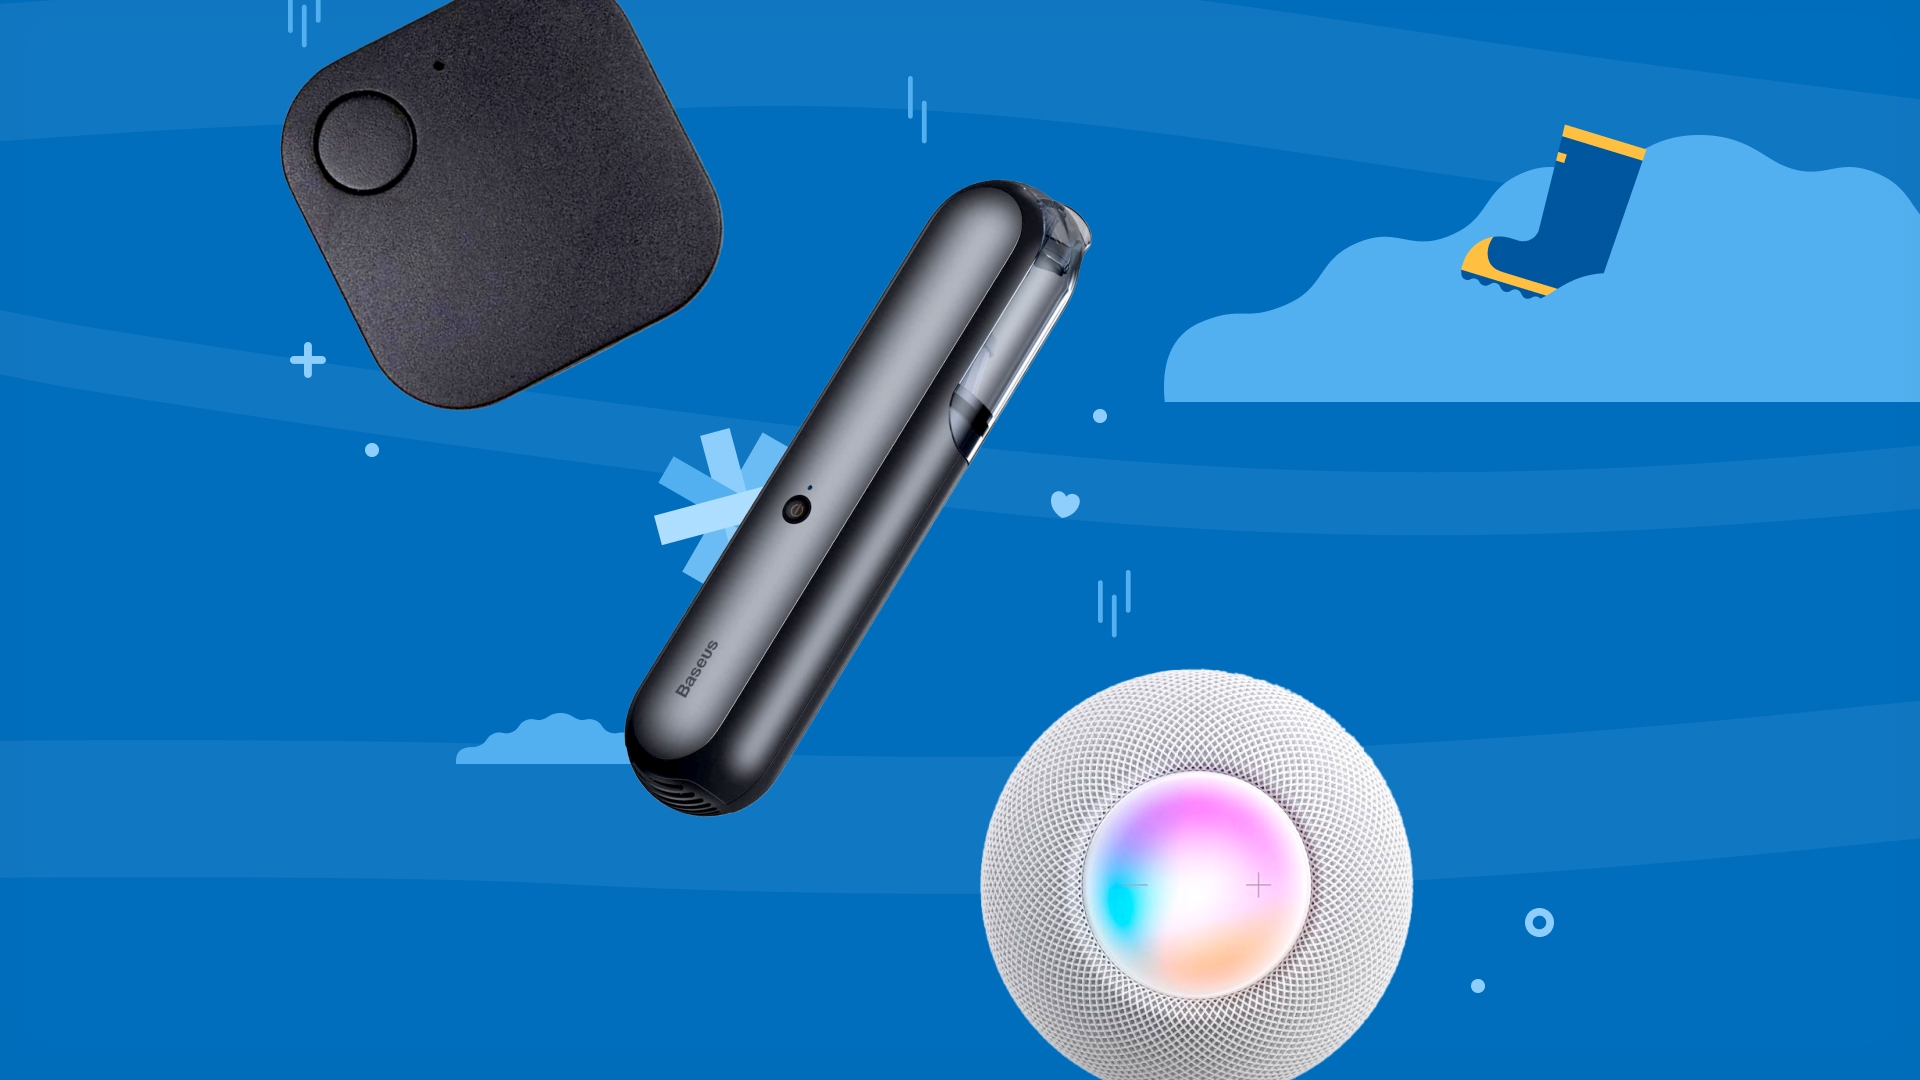  An array of Father's Day gift ideas displayed on a blue background - a key finder, Apple Homepod mini and a rechargeable cordless vacuum.